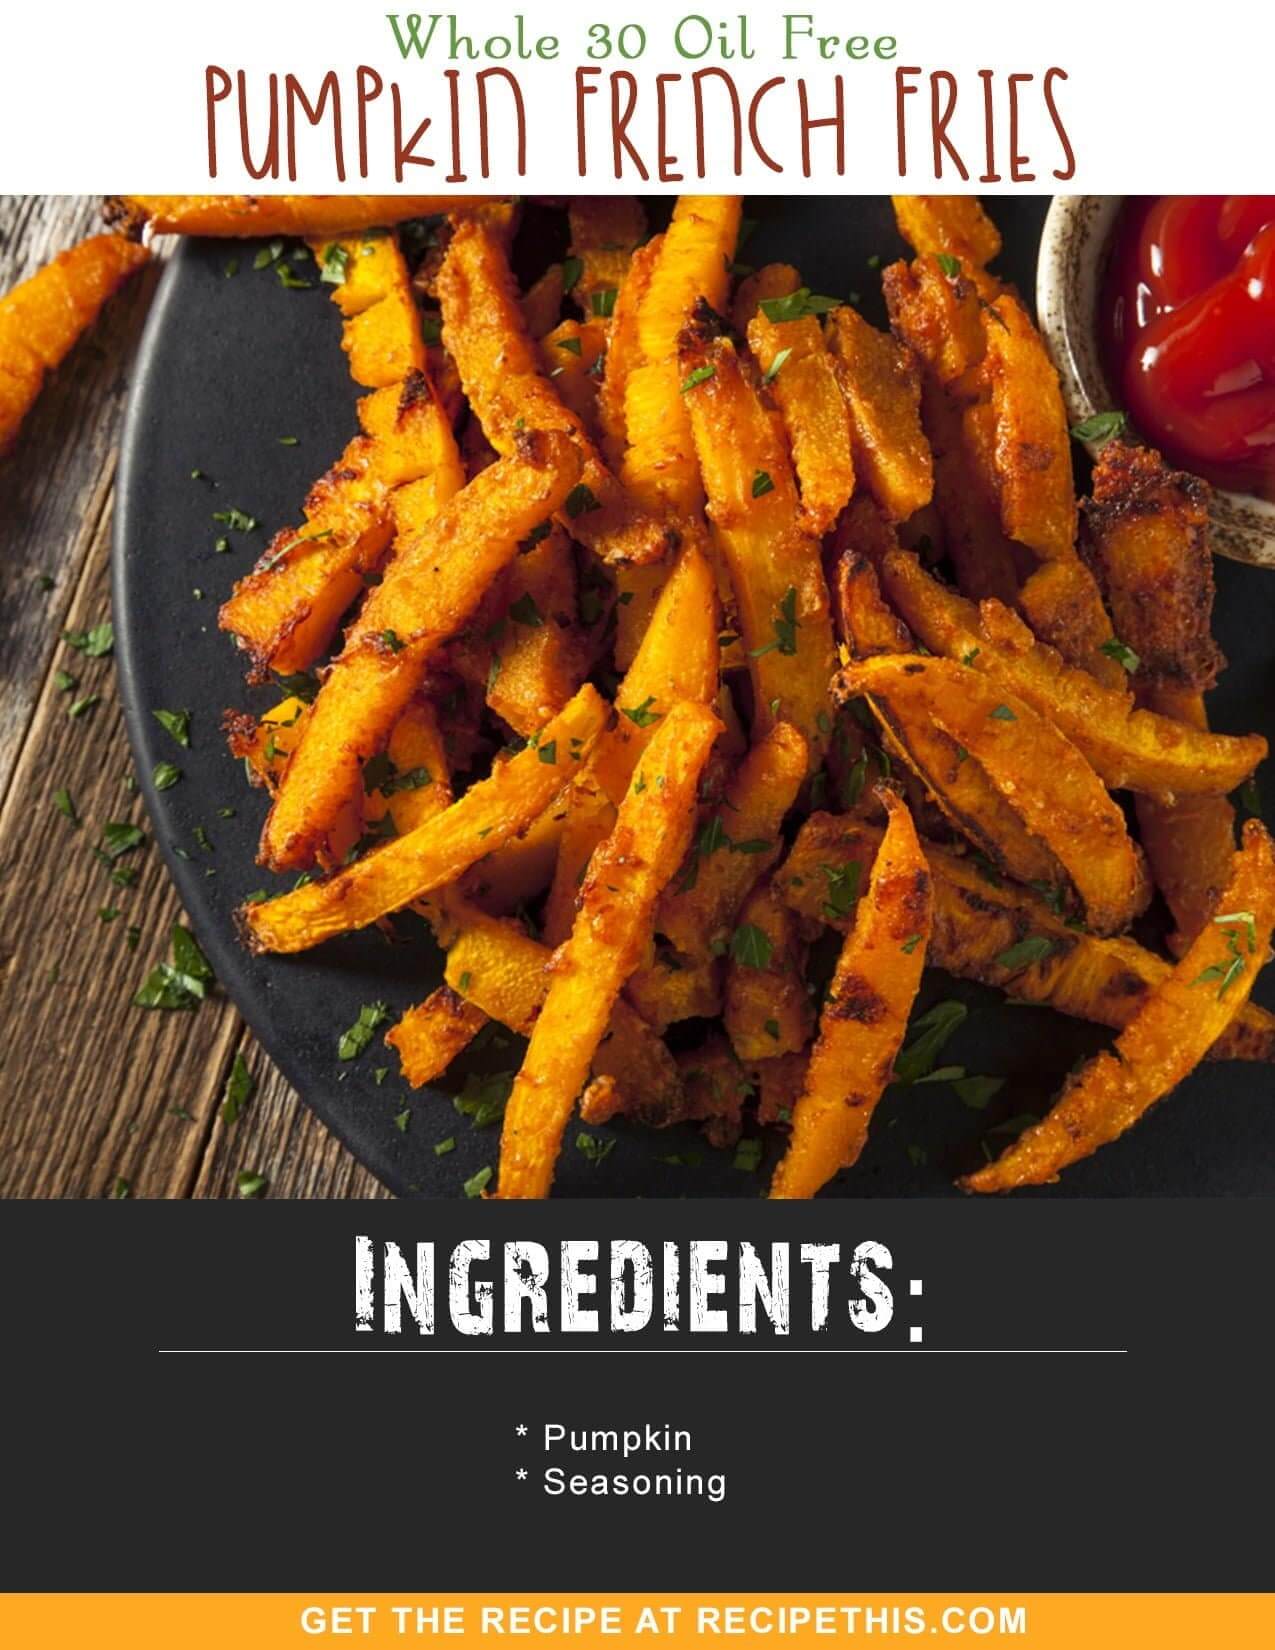 Whole 30 | Whole 30 Oil Free Pumpkin French Fries Recipe from RecipeThis.com